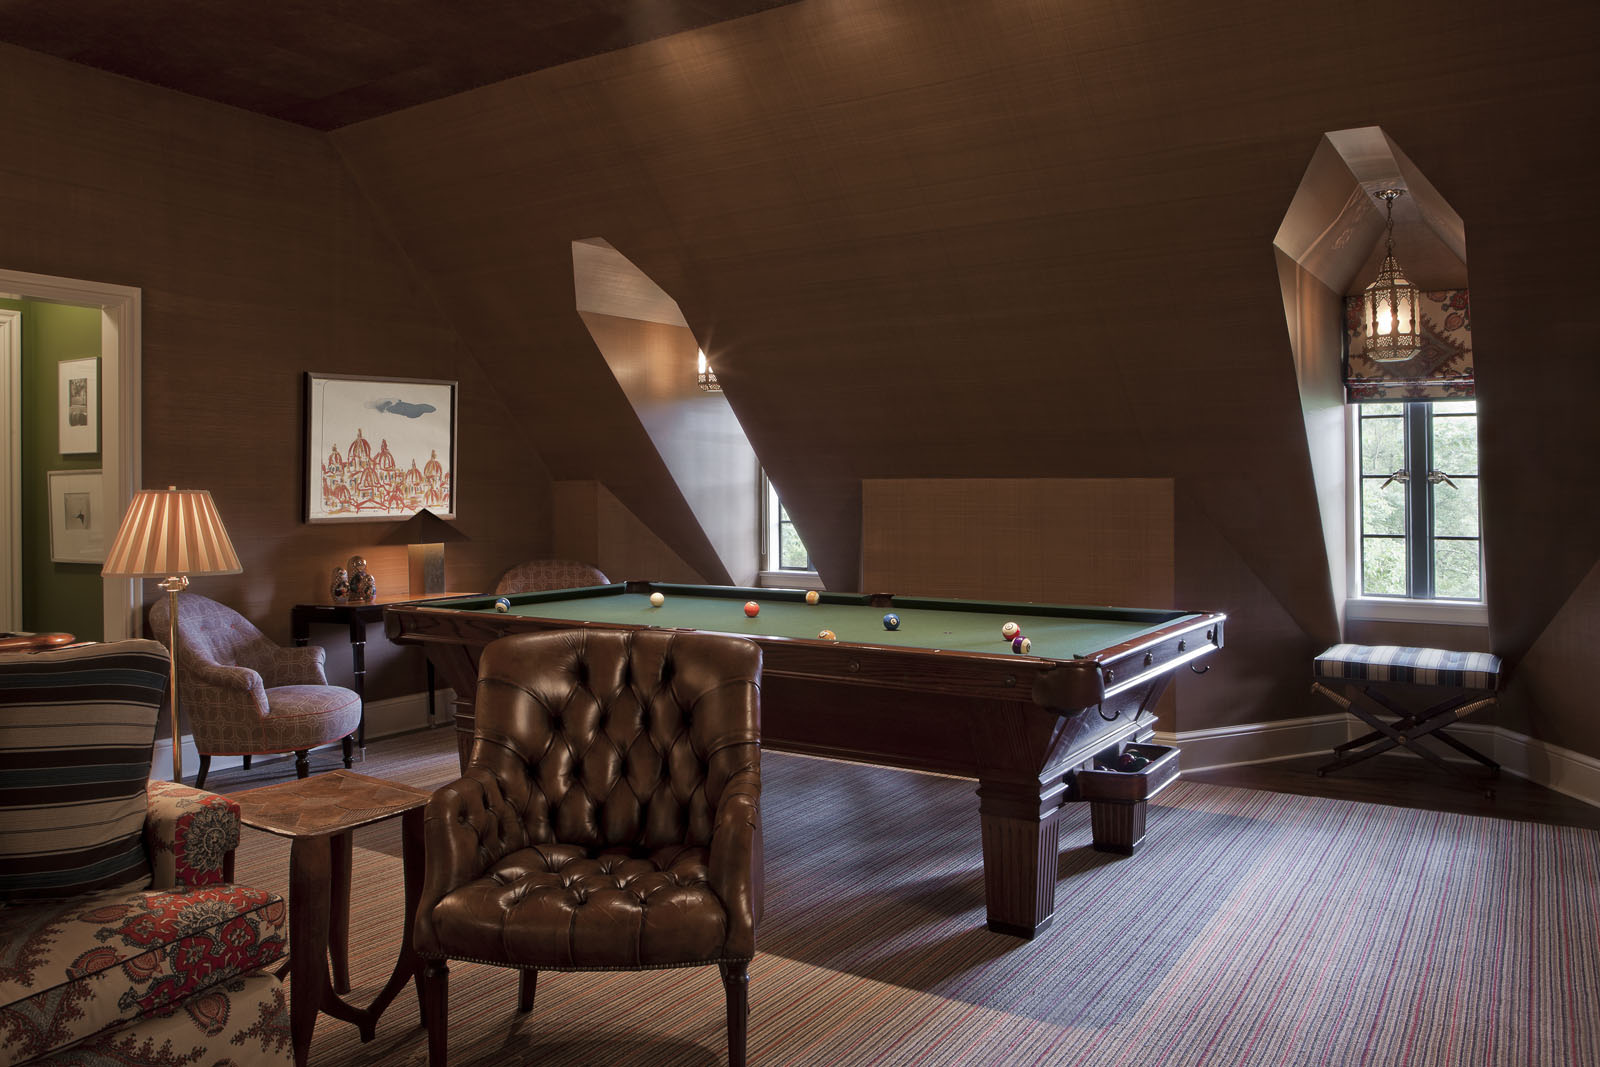  Part of the former staff quarters on the third floor was turned into a billiard room. The early-20th-century library chairs, vintage pool table, and leather-tiled ceiling add to the clubby atmosphere. 